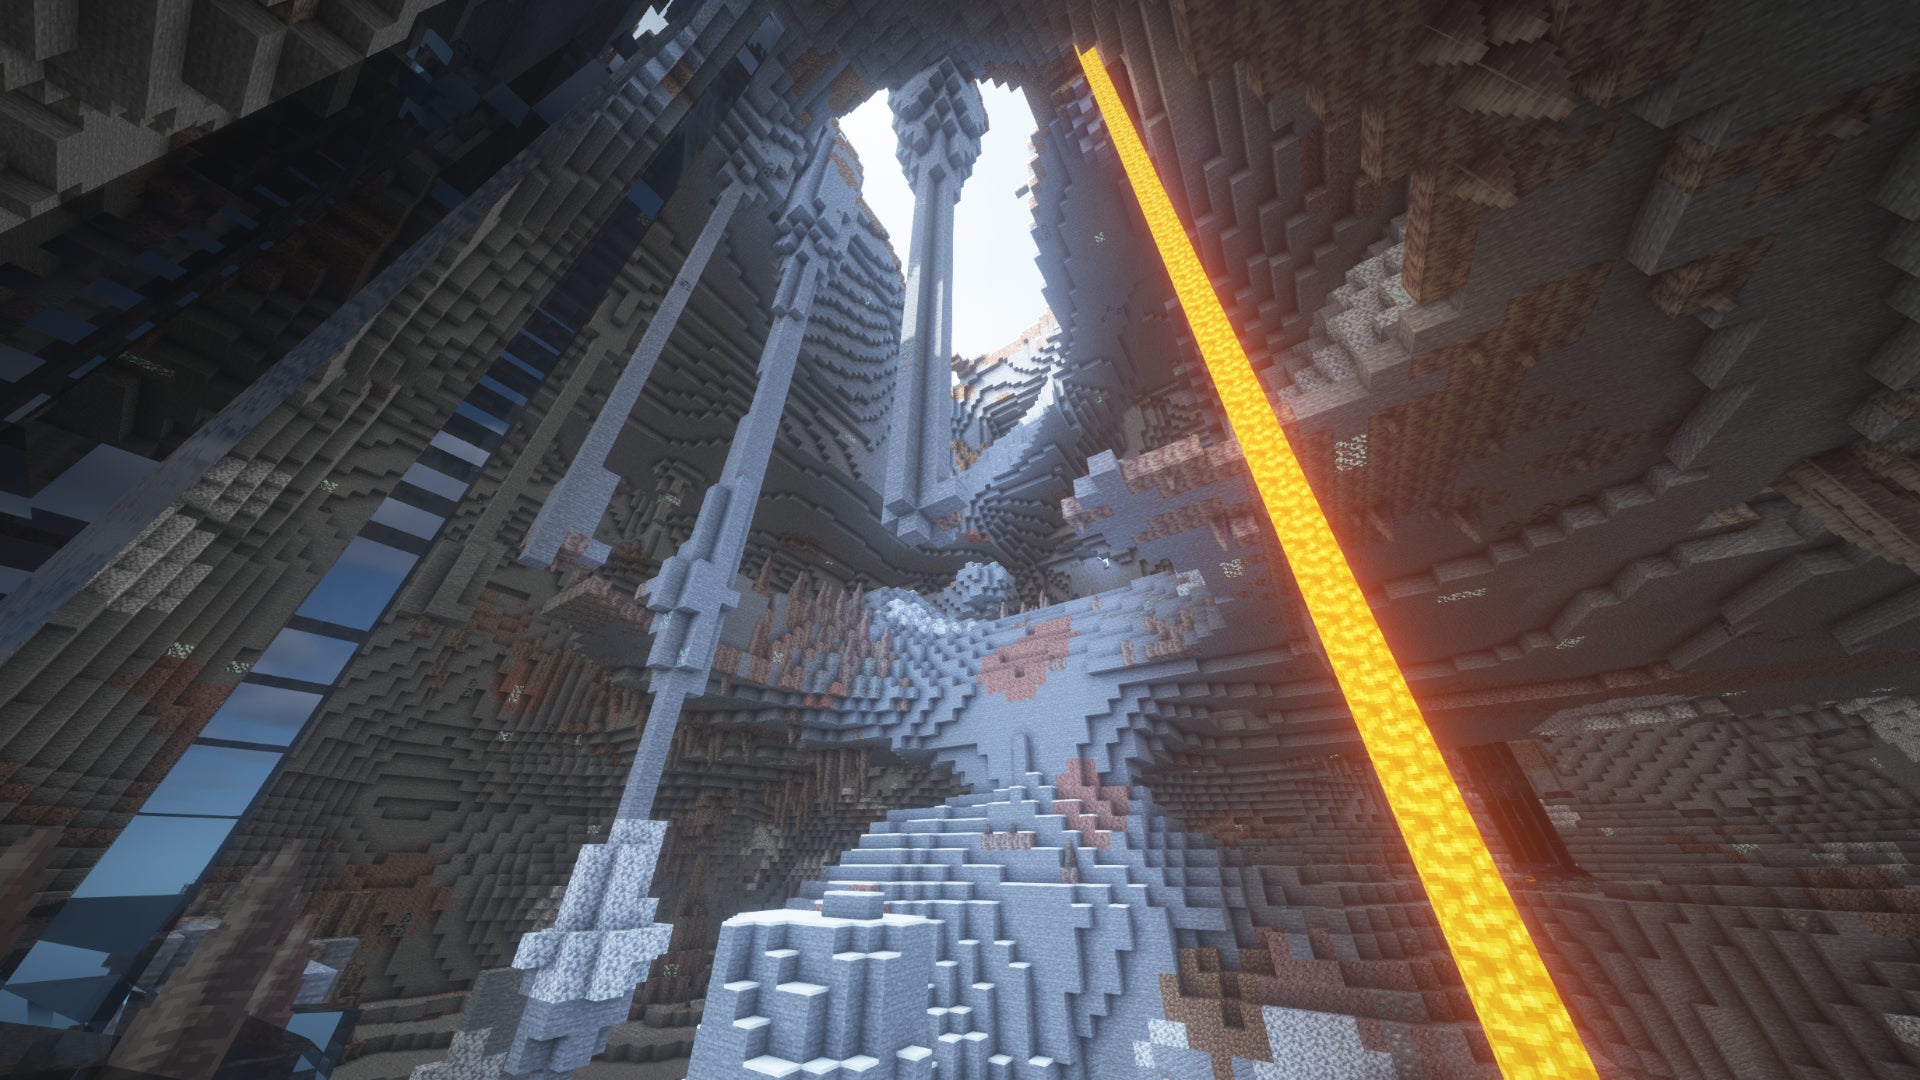 The view from the bottom of a Minecraft cavern, looking upwards at the sunlight emanating from the cave opening above.